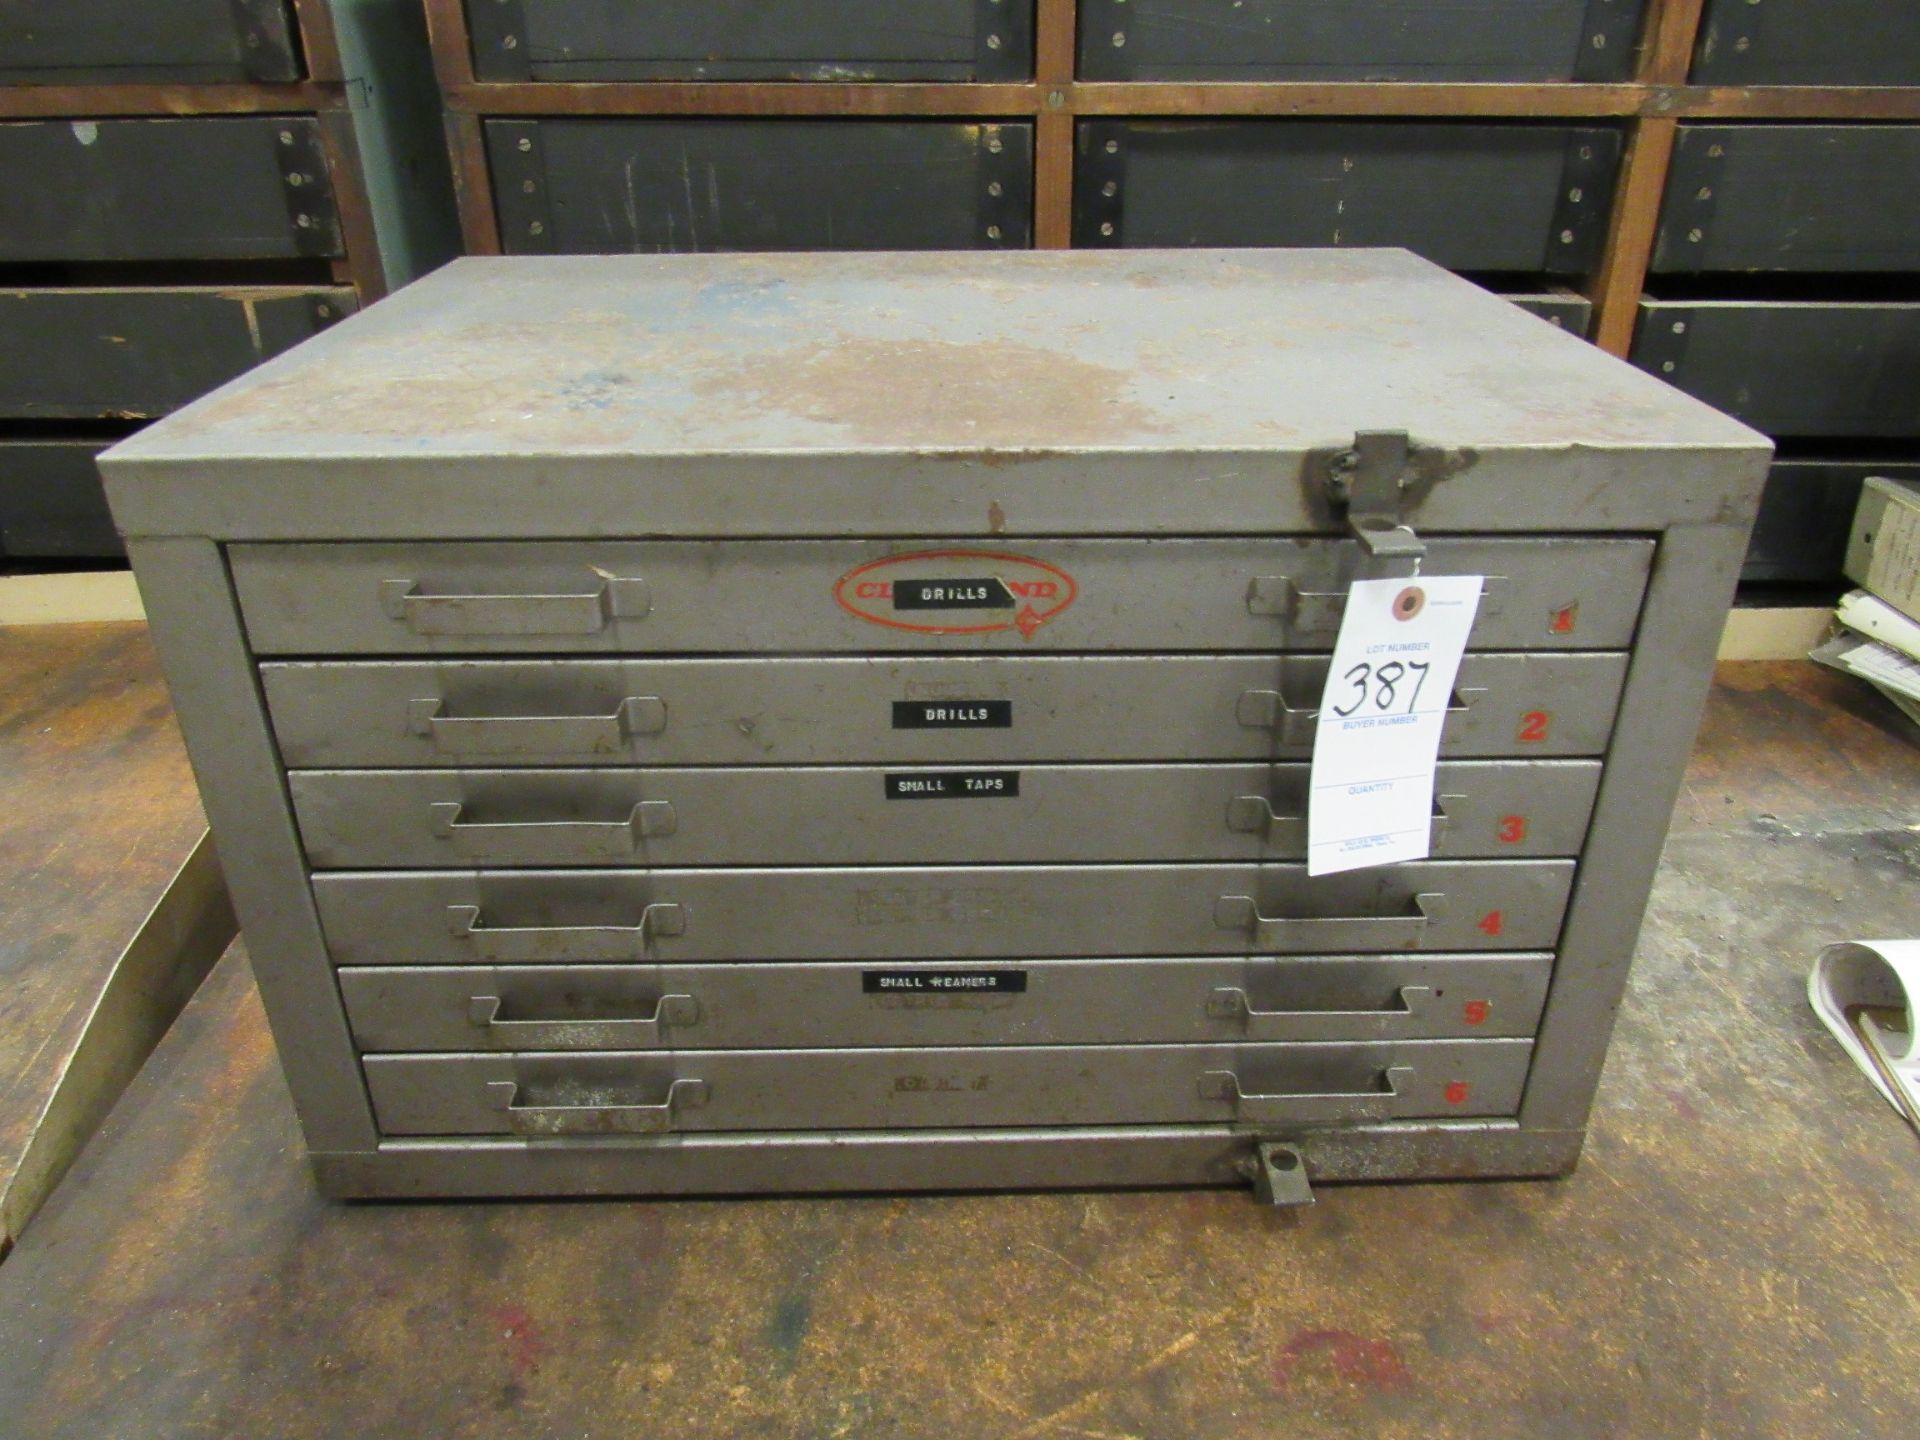 Cleveland 6 Draw Tool Cabinet w/ Asstorted Endmills, Drills, Taps